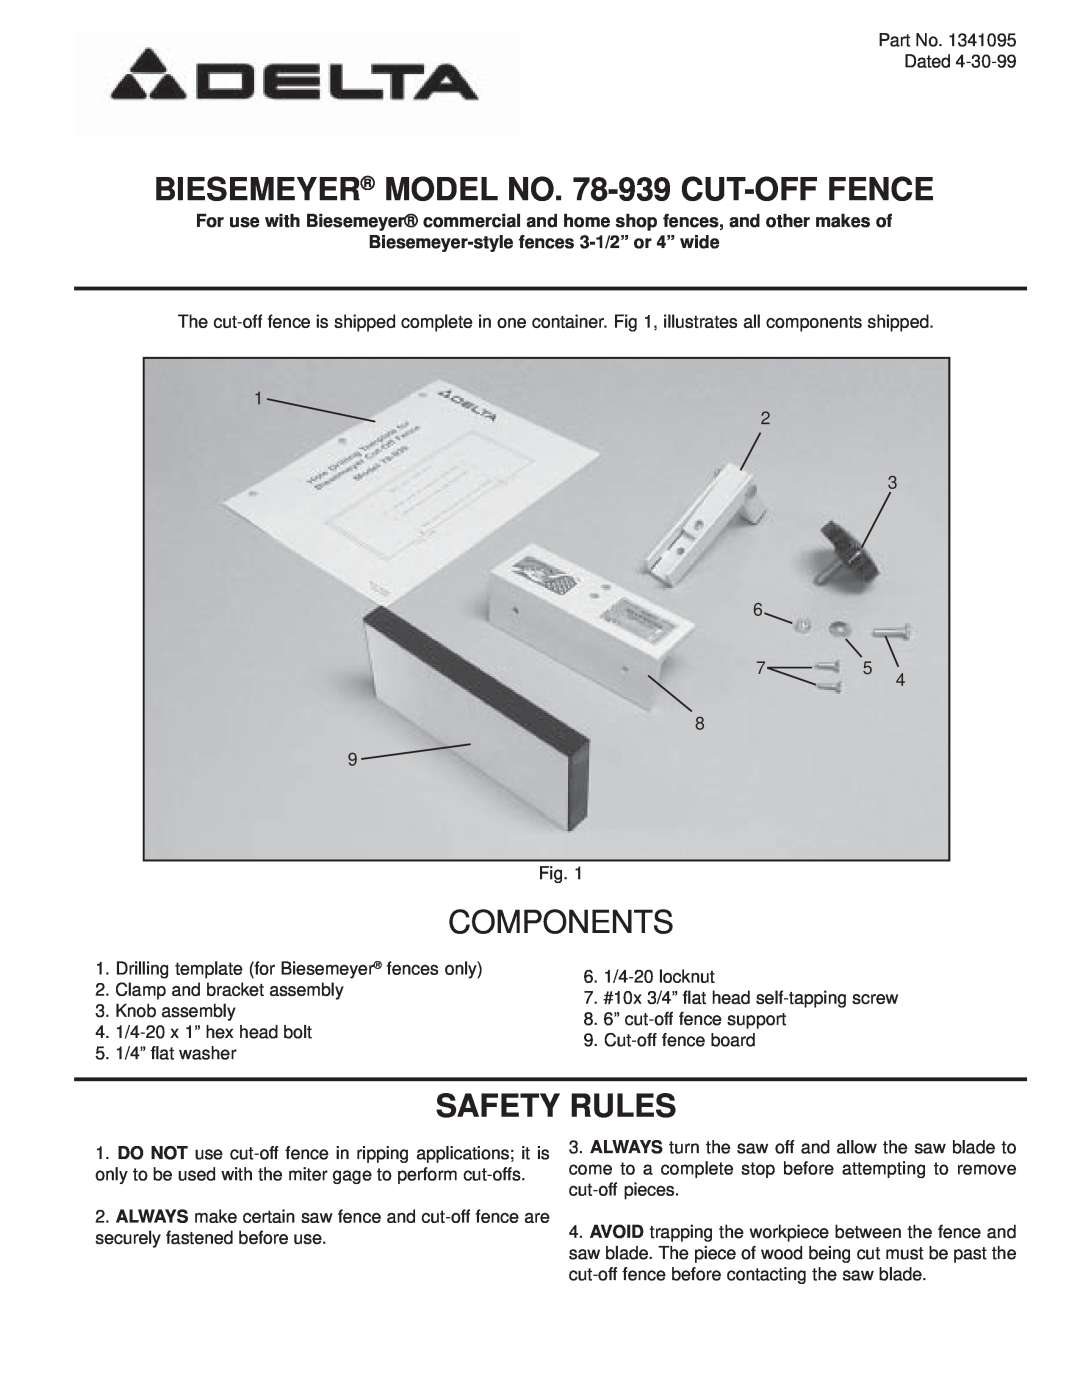 Delta manual Components, BIESEMEYER MODEL NO. 78-939 CUT-OFF FENCE, Safety Rules 